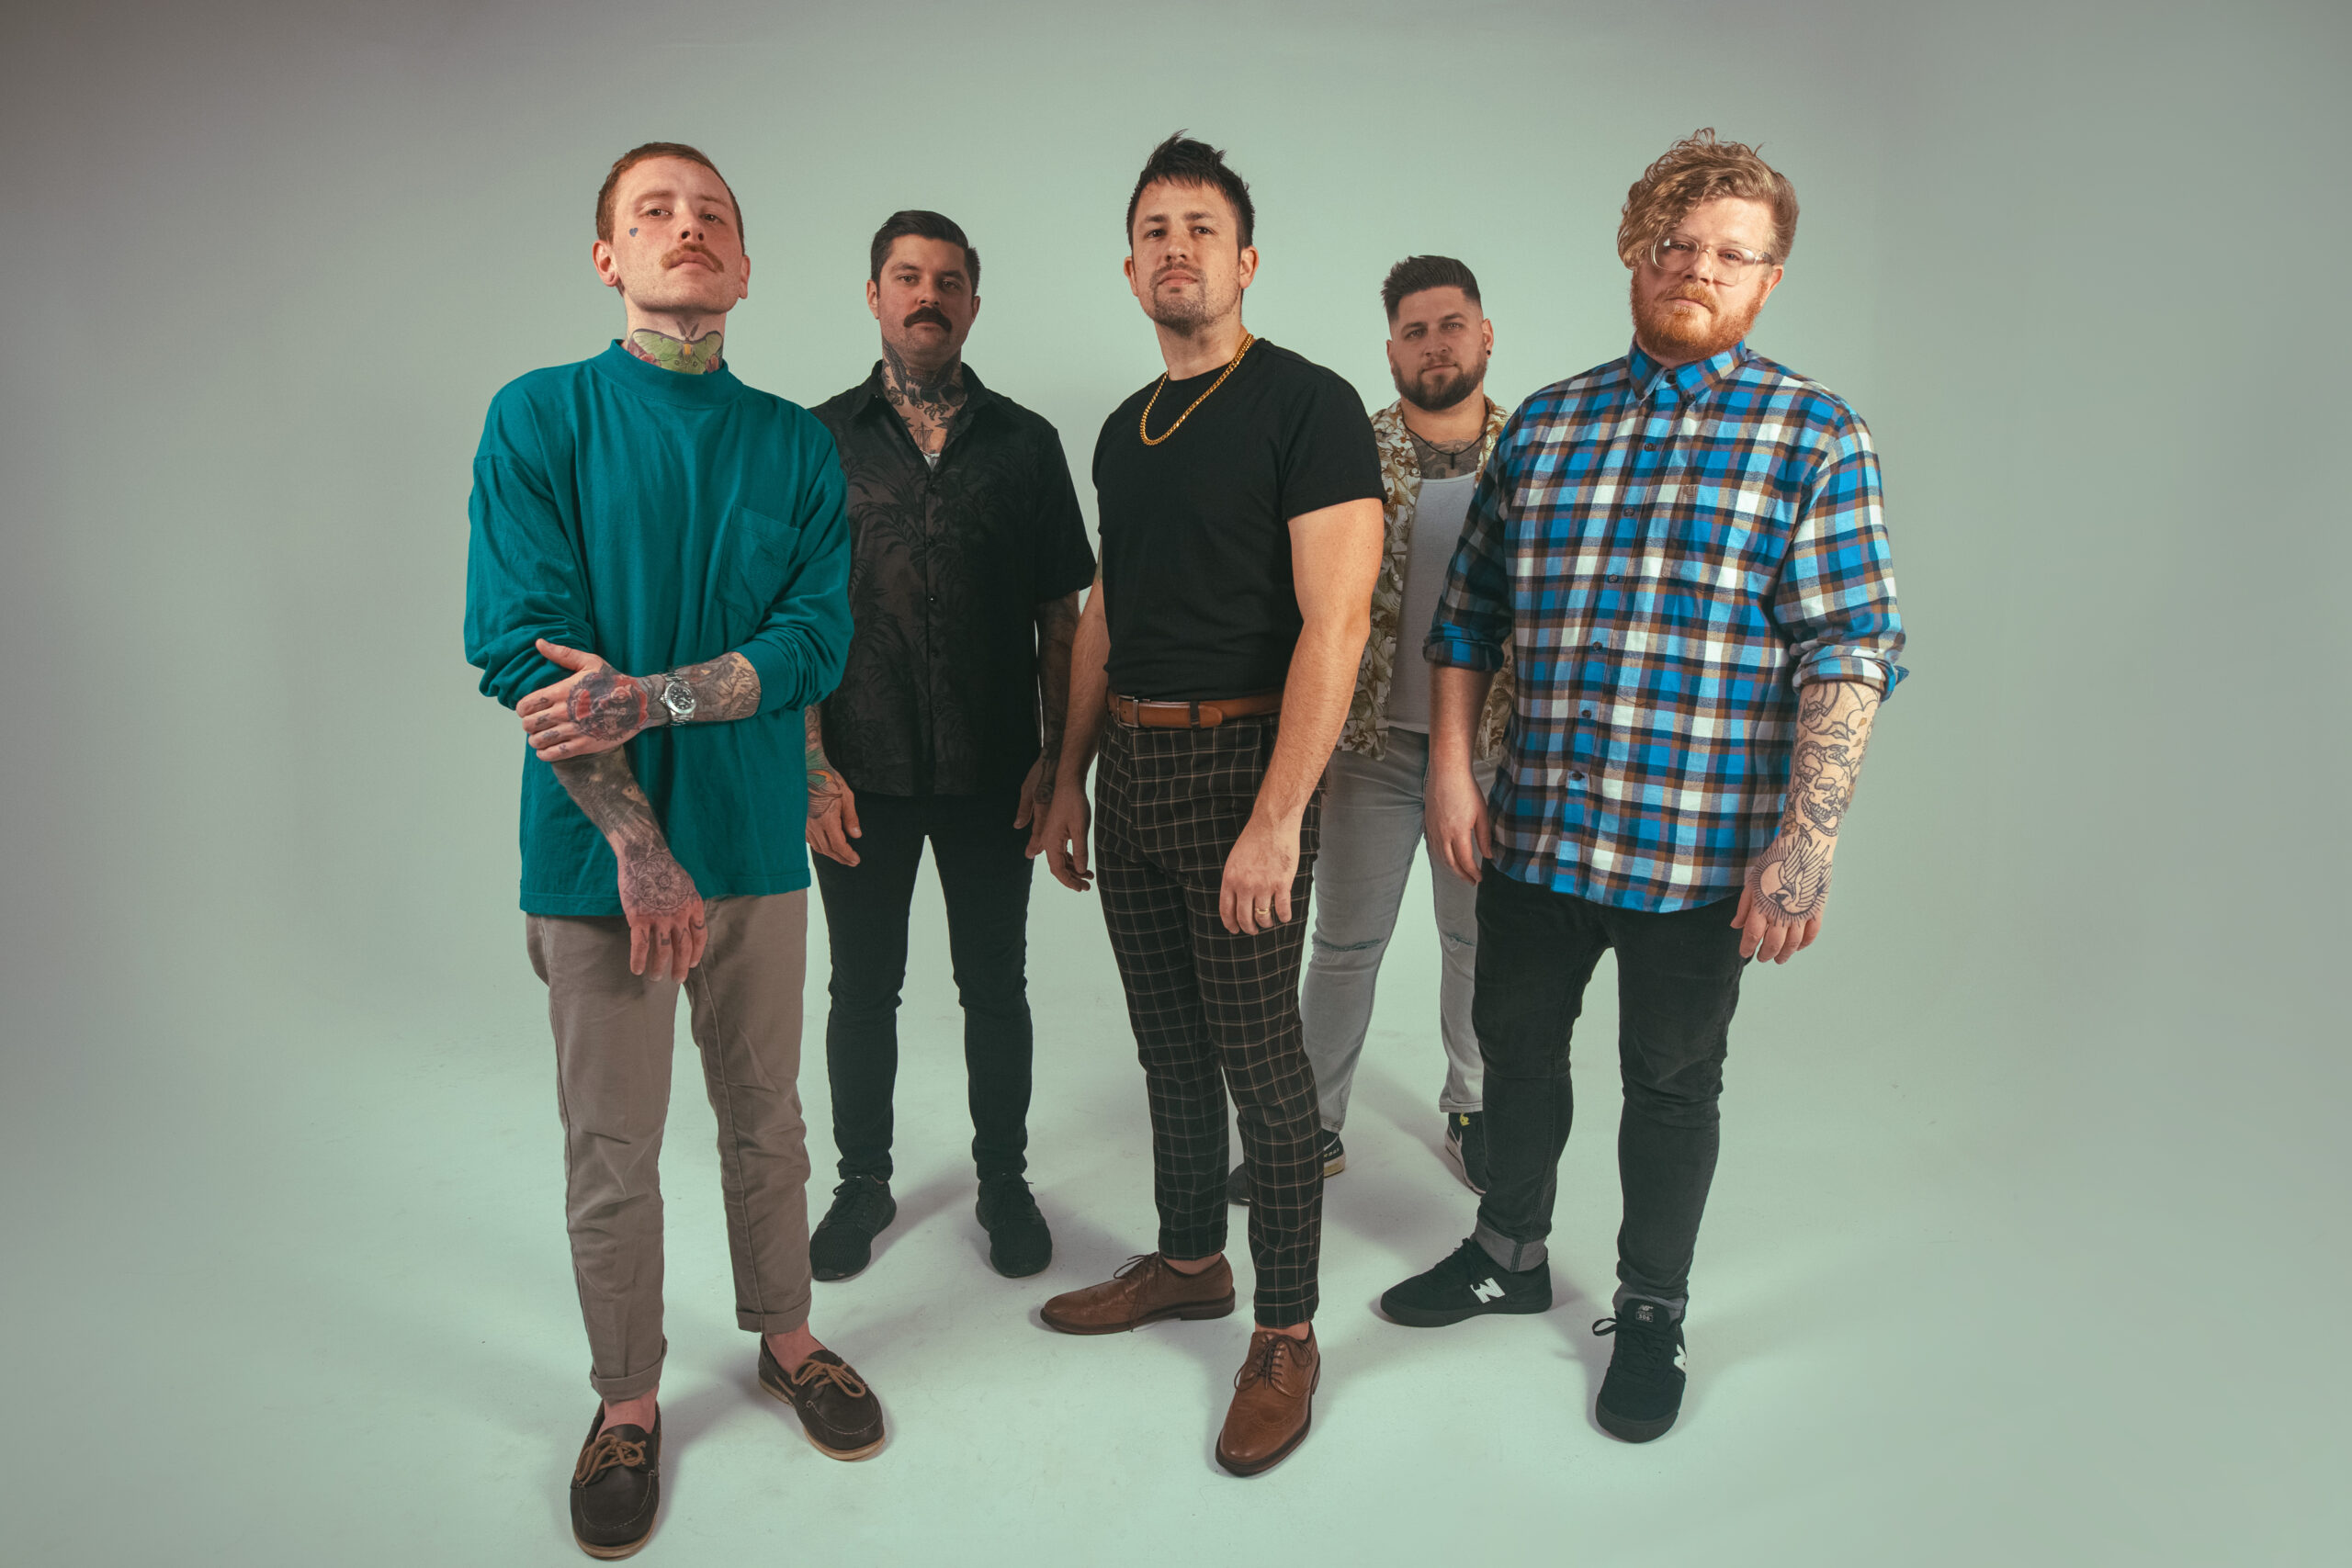 VIDEO NEWS: Capstan Release Video For New Single ‘What You Want’